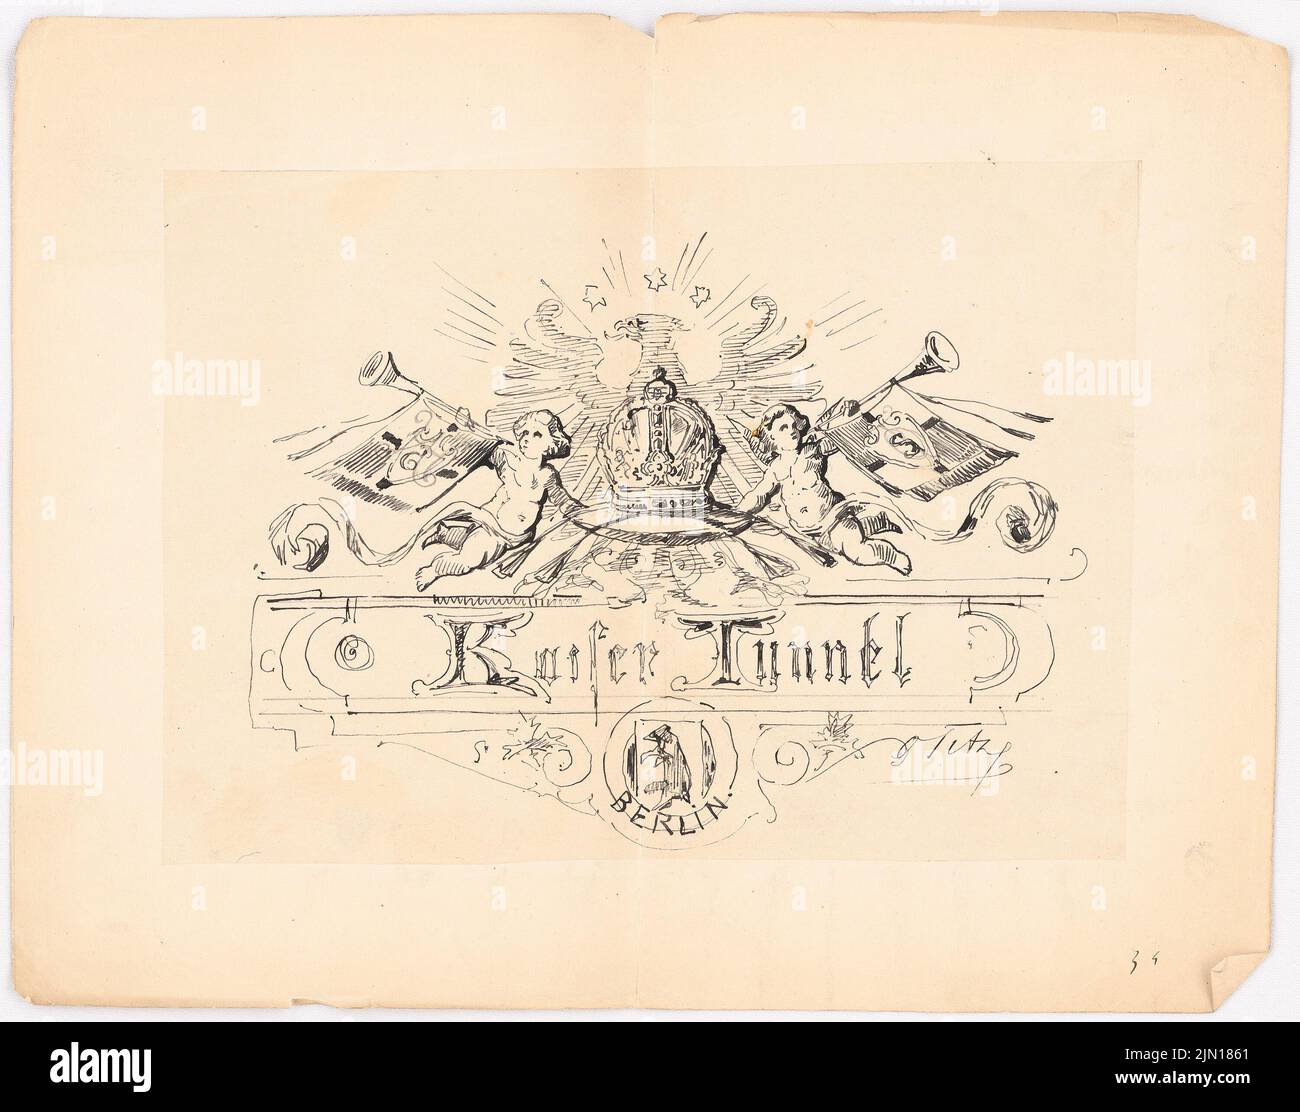 Titz Oskar (1845-1887), map on the occasion of the opening of the Kaiser Wilhelm tunnel (without date): two putti hold the imperial crown. Ink on transparent, 22.6 x 28.8 cm (including scan edges) Titz Oskar  (1845-1887): Karte zum Anlass der Eröffnung des Kaiser-Wilhelm-Tunnels Stock Photo